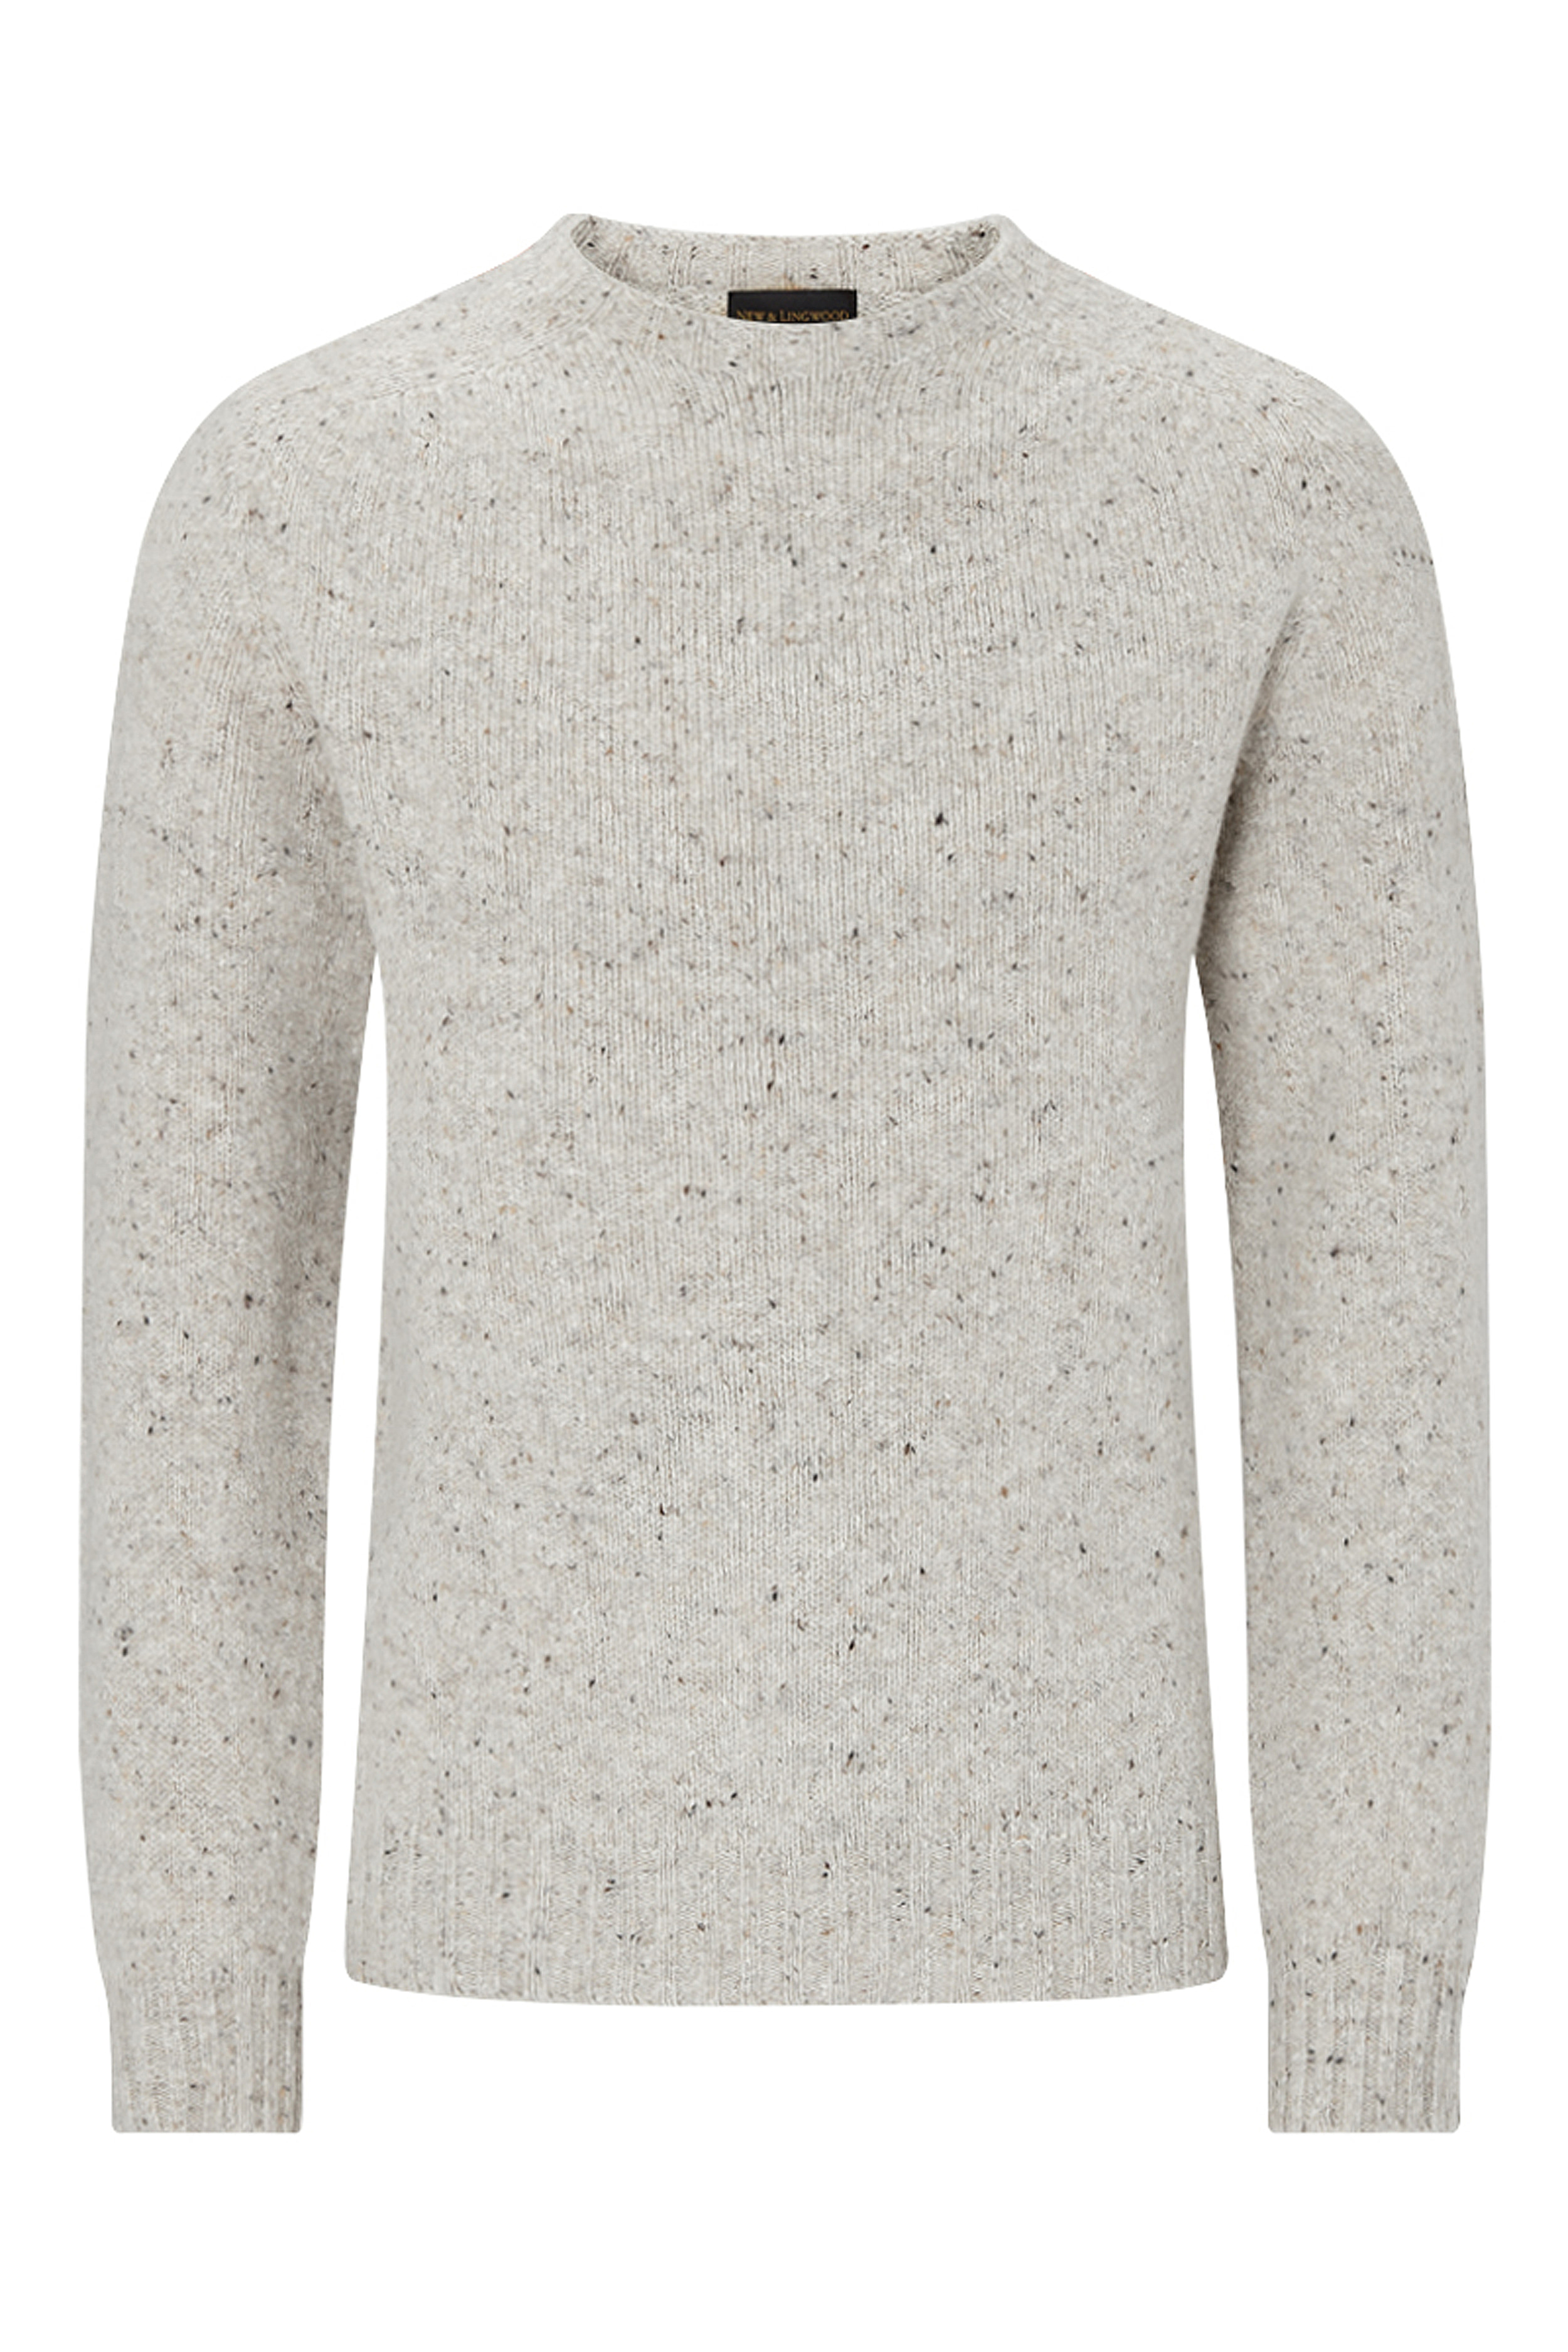 Stone Donegal Fleck Crew Neck Wool Sweater | New & Lingwood